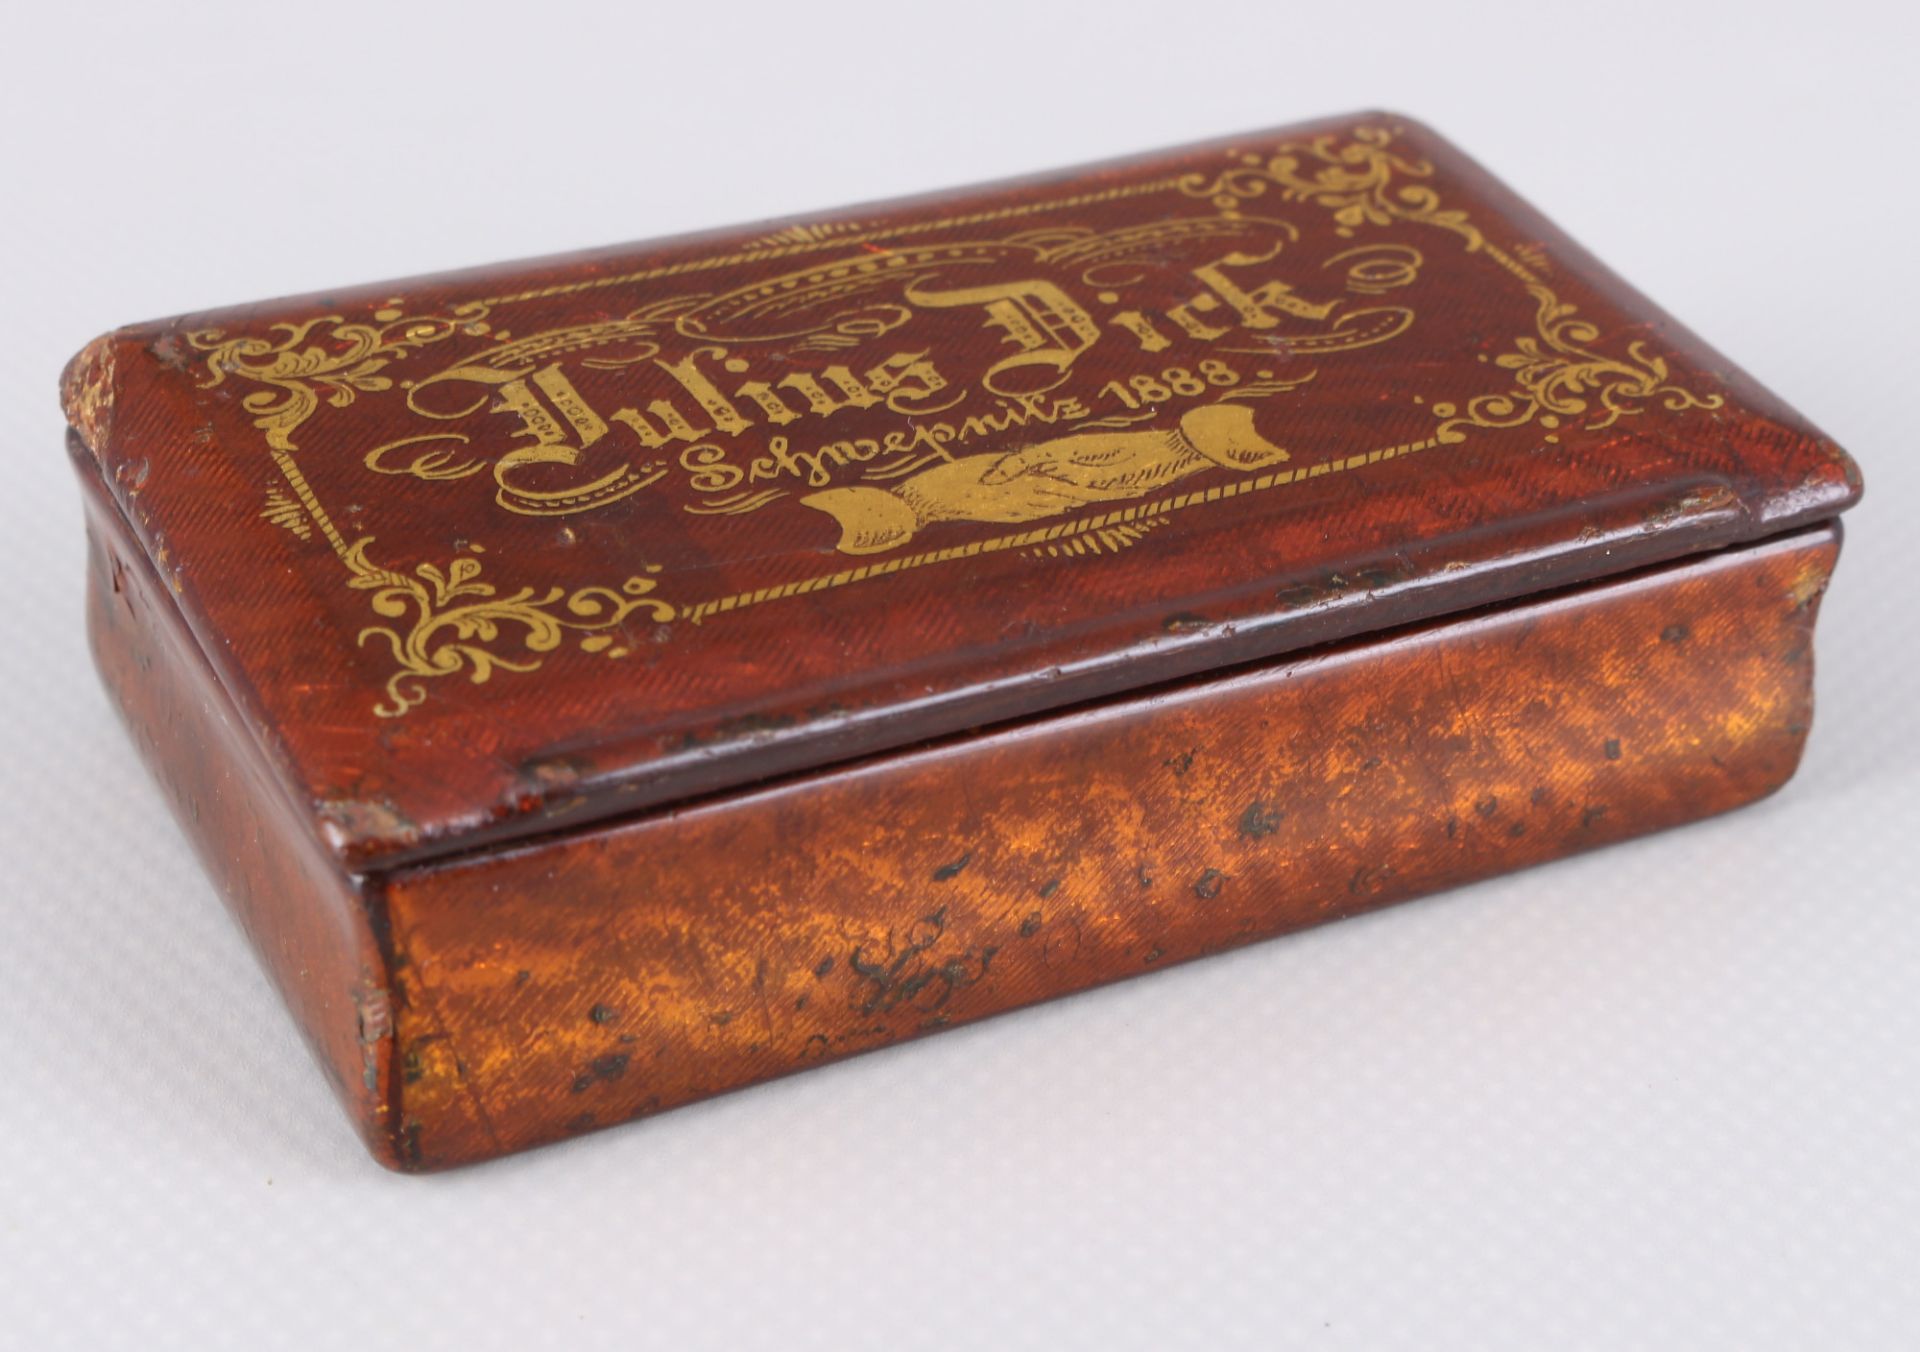 2 lacquer cans of tobacco 19th century, - Image 3 of 5